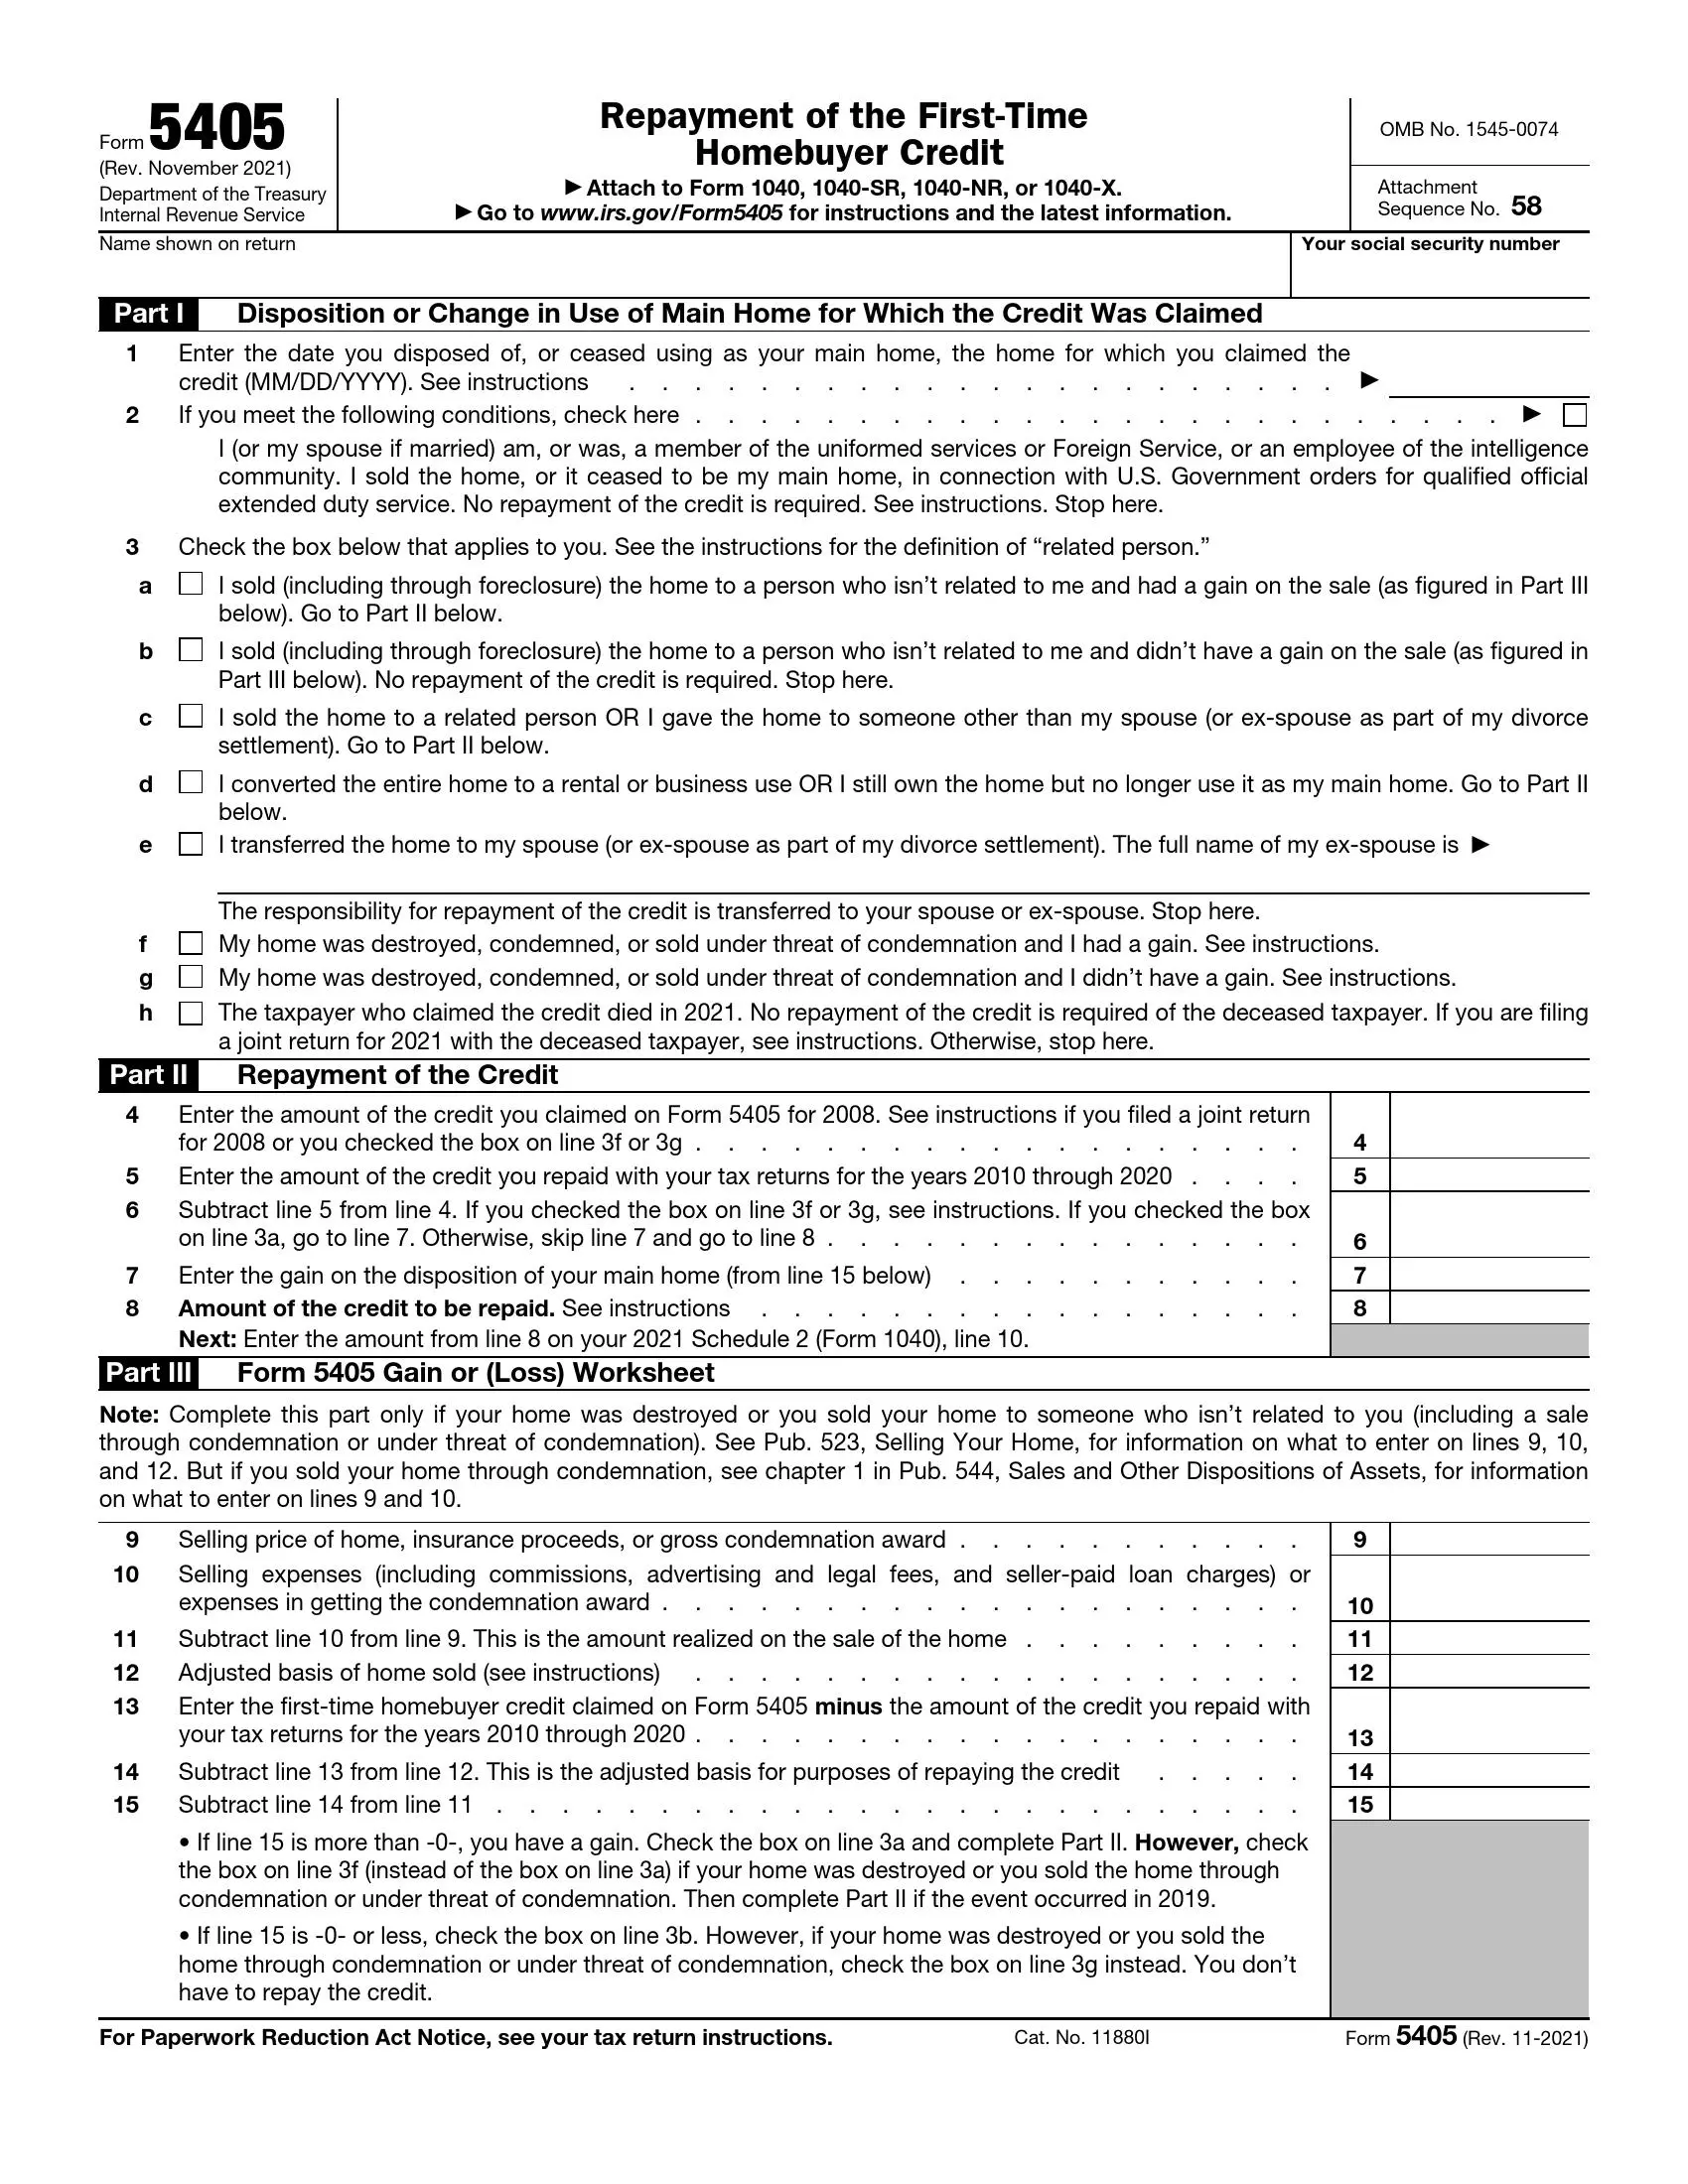 irs form 5405 rev 11 2021 preview